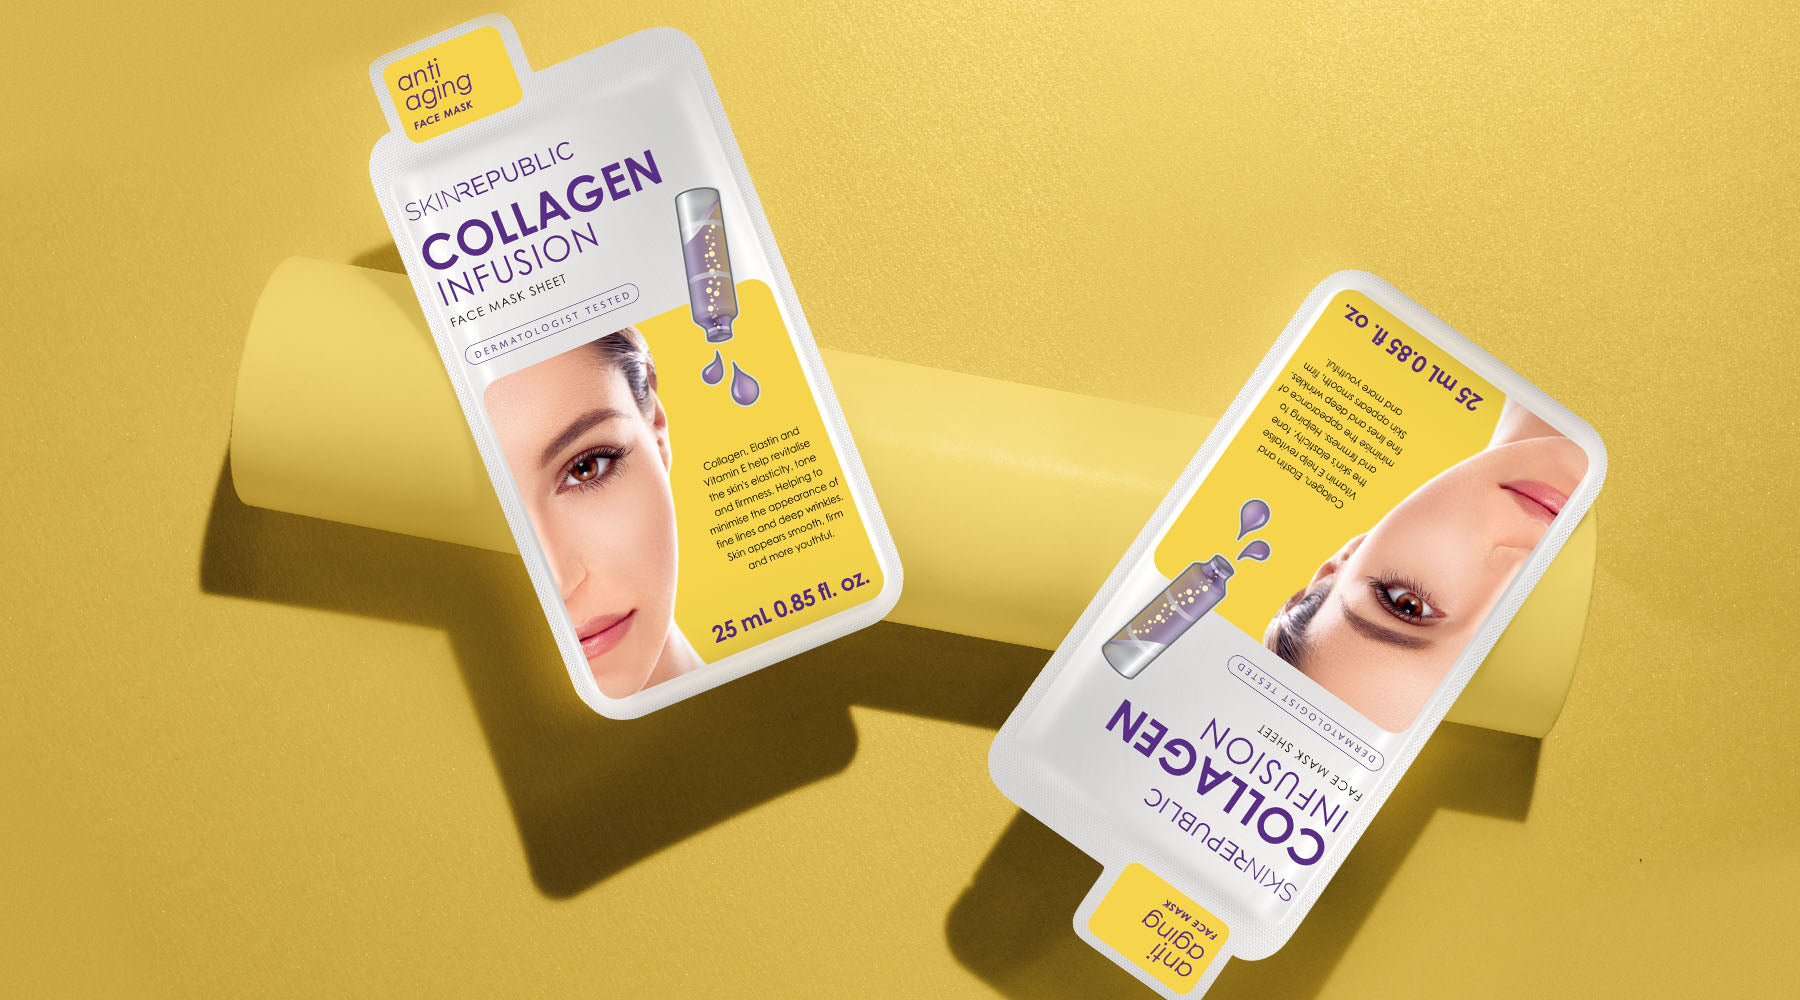 Skin Republic Collagen Infusion Face Mask: 4-week challenge